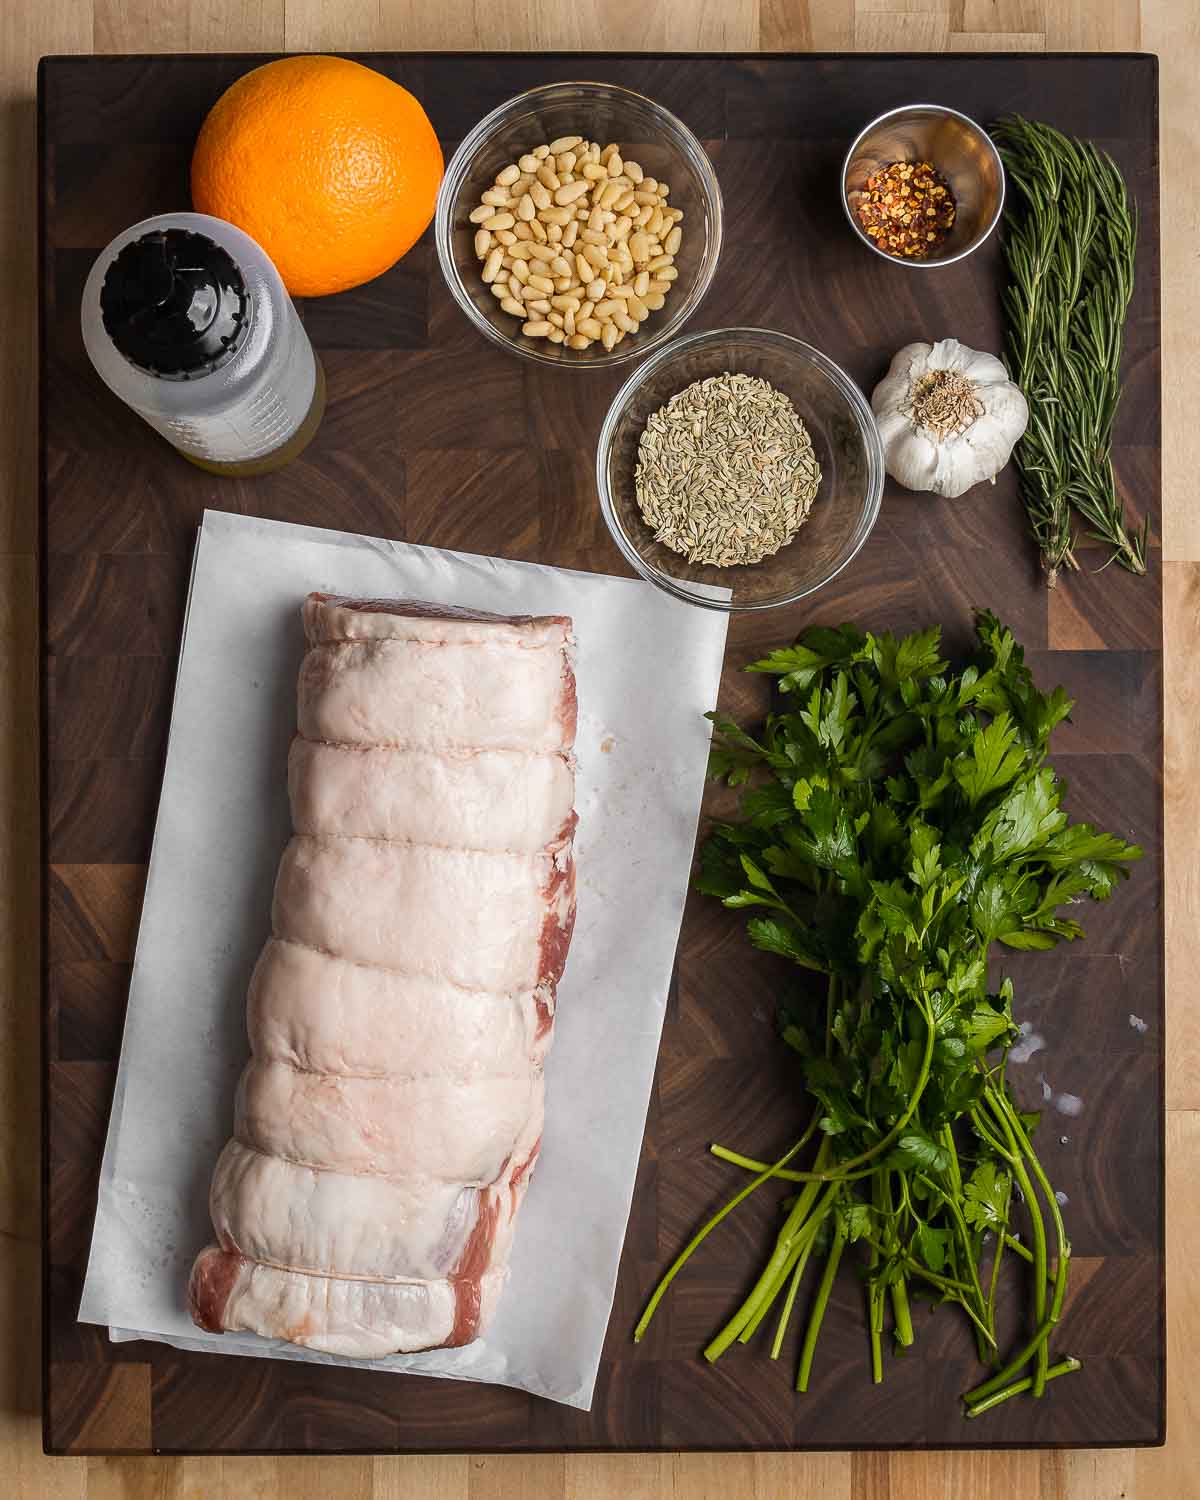 Ingredients shown: orange, olive oil. pine nuts, fennel seeds, hot red pepper flakes, garlic, rosemary, parsley, and tied pork loin.